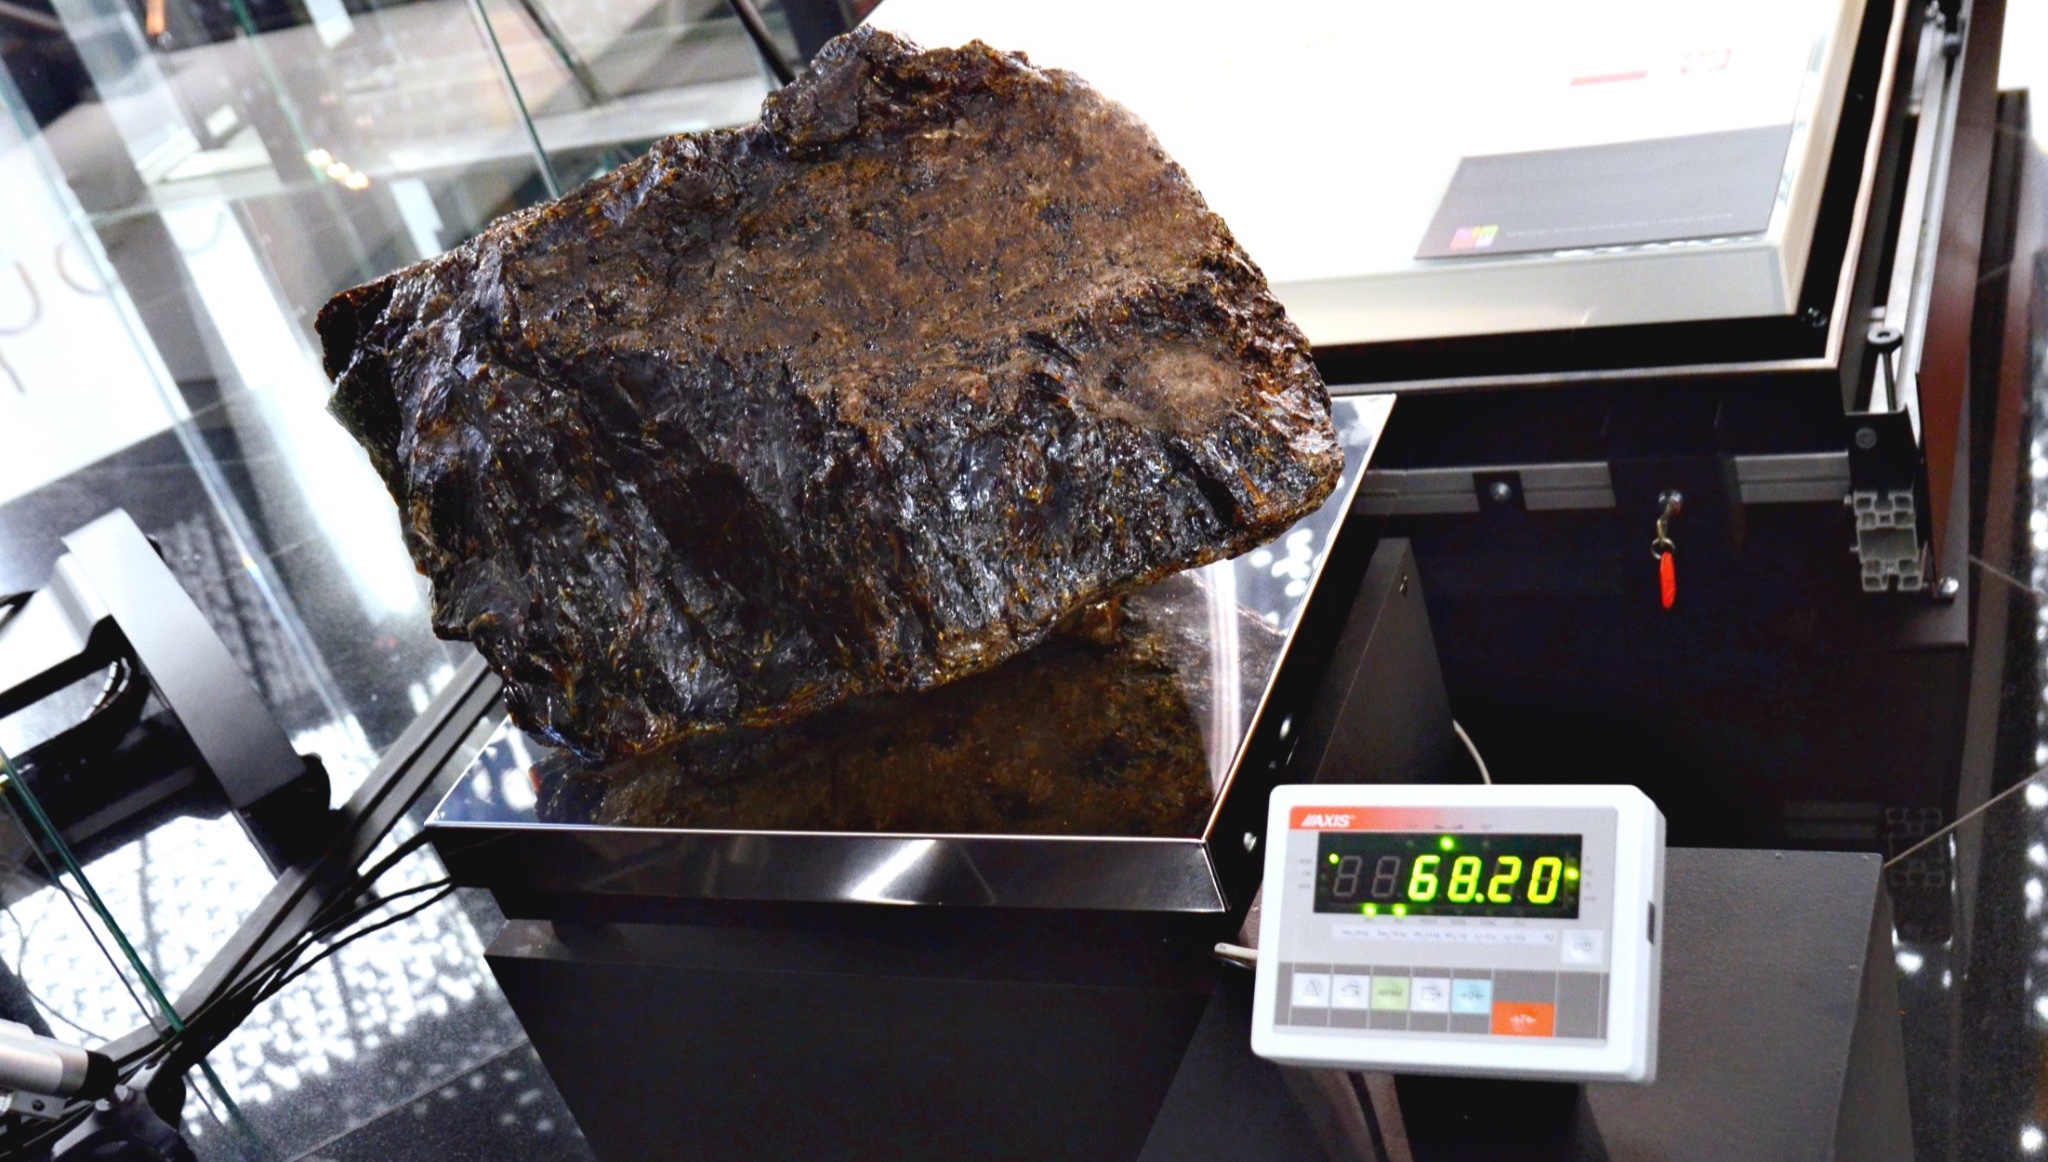 The largest lump of amber in the Gdansk museum with the Guinness World Record